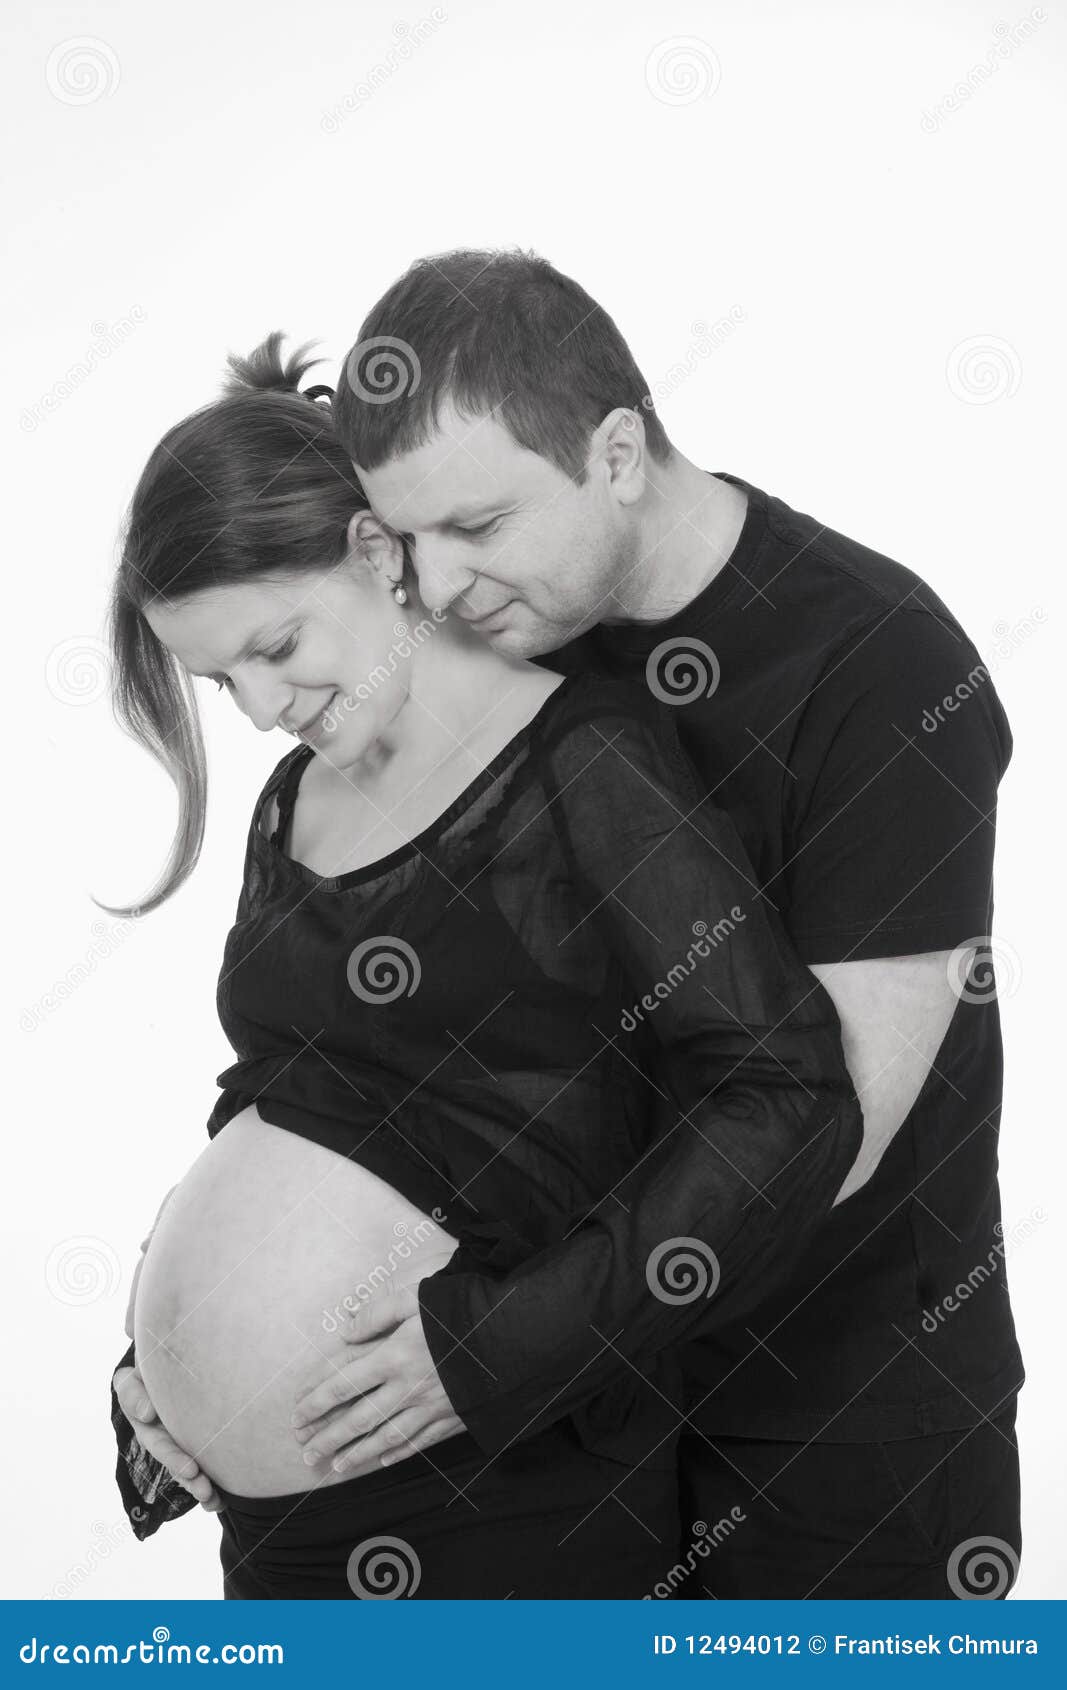 Expecting couple stock photo. Image of care, people, happiness - 12494012